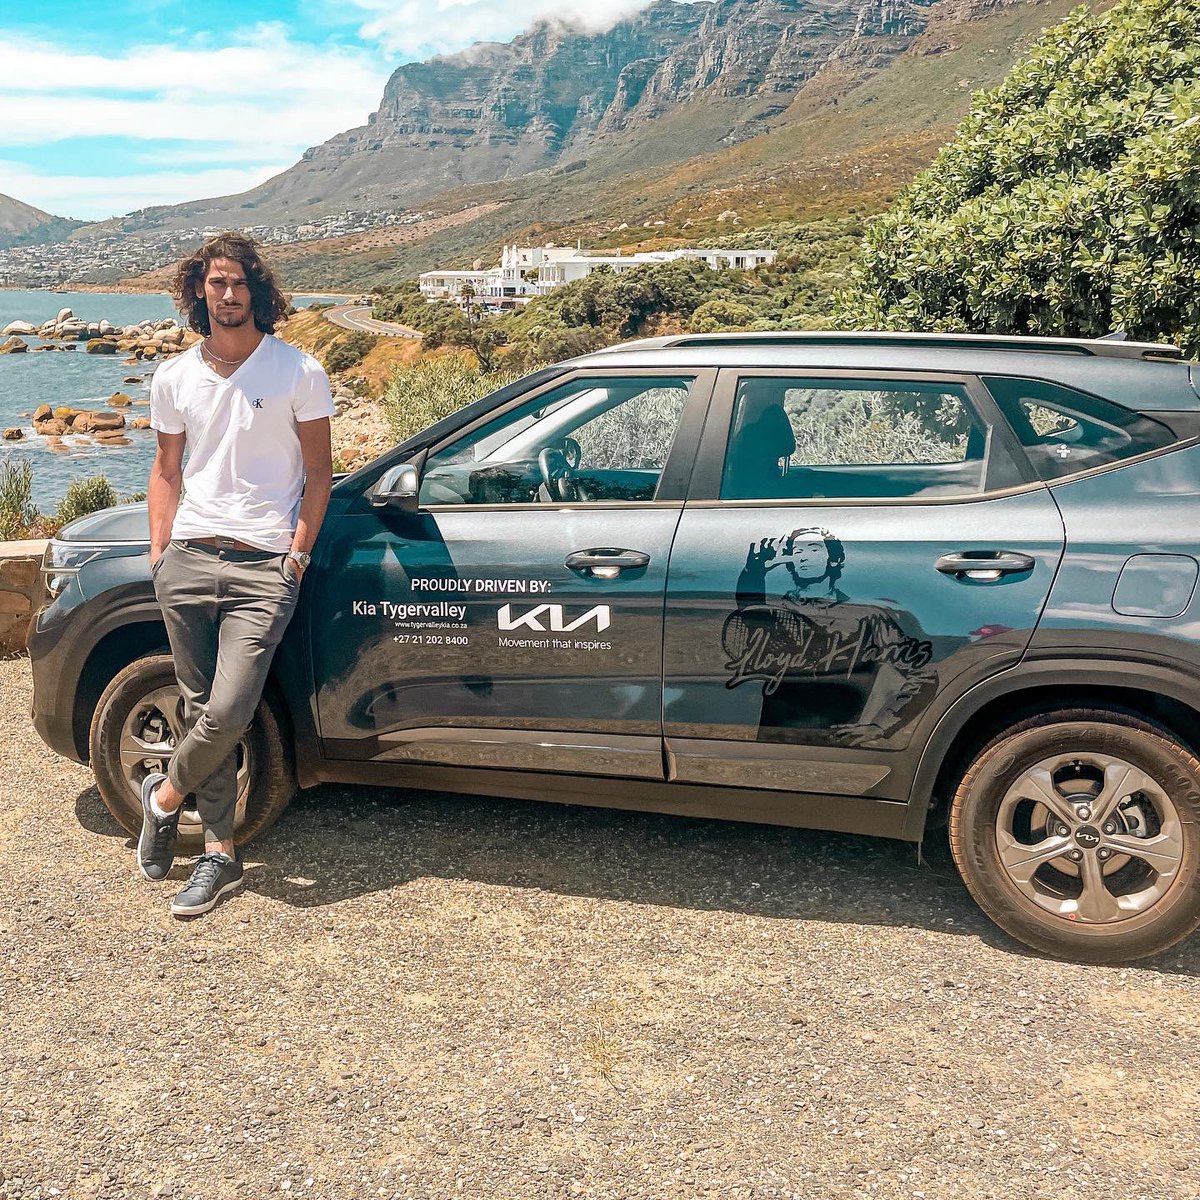 It’s great being back home and thanks to @kiasouthafrica and their Tygervalley dealership for the ride whilst I’m in #capetown • • • • #kia #movementthatinspires #kiasouthafrica